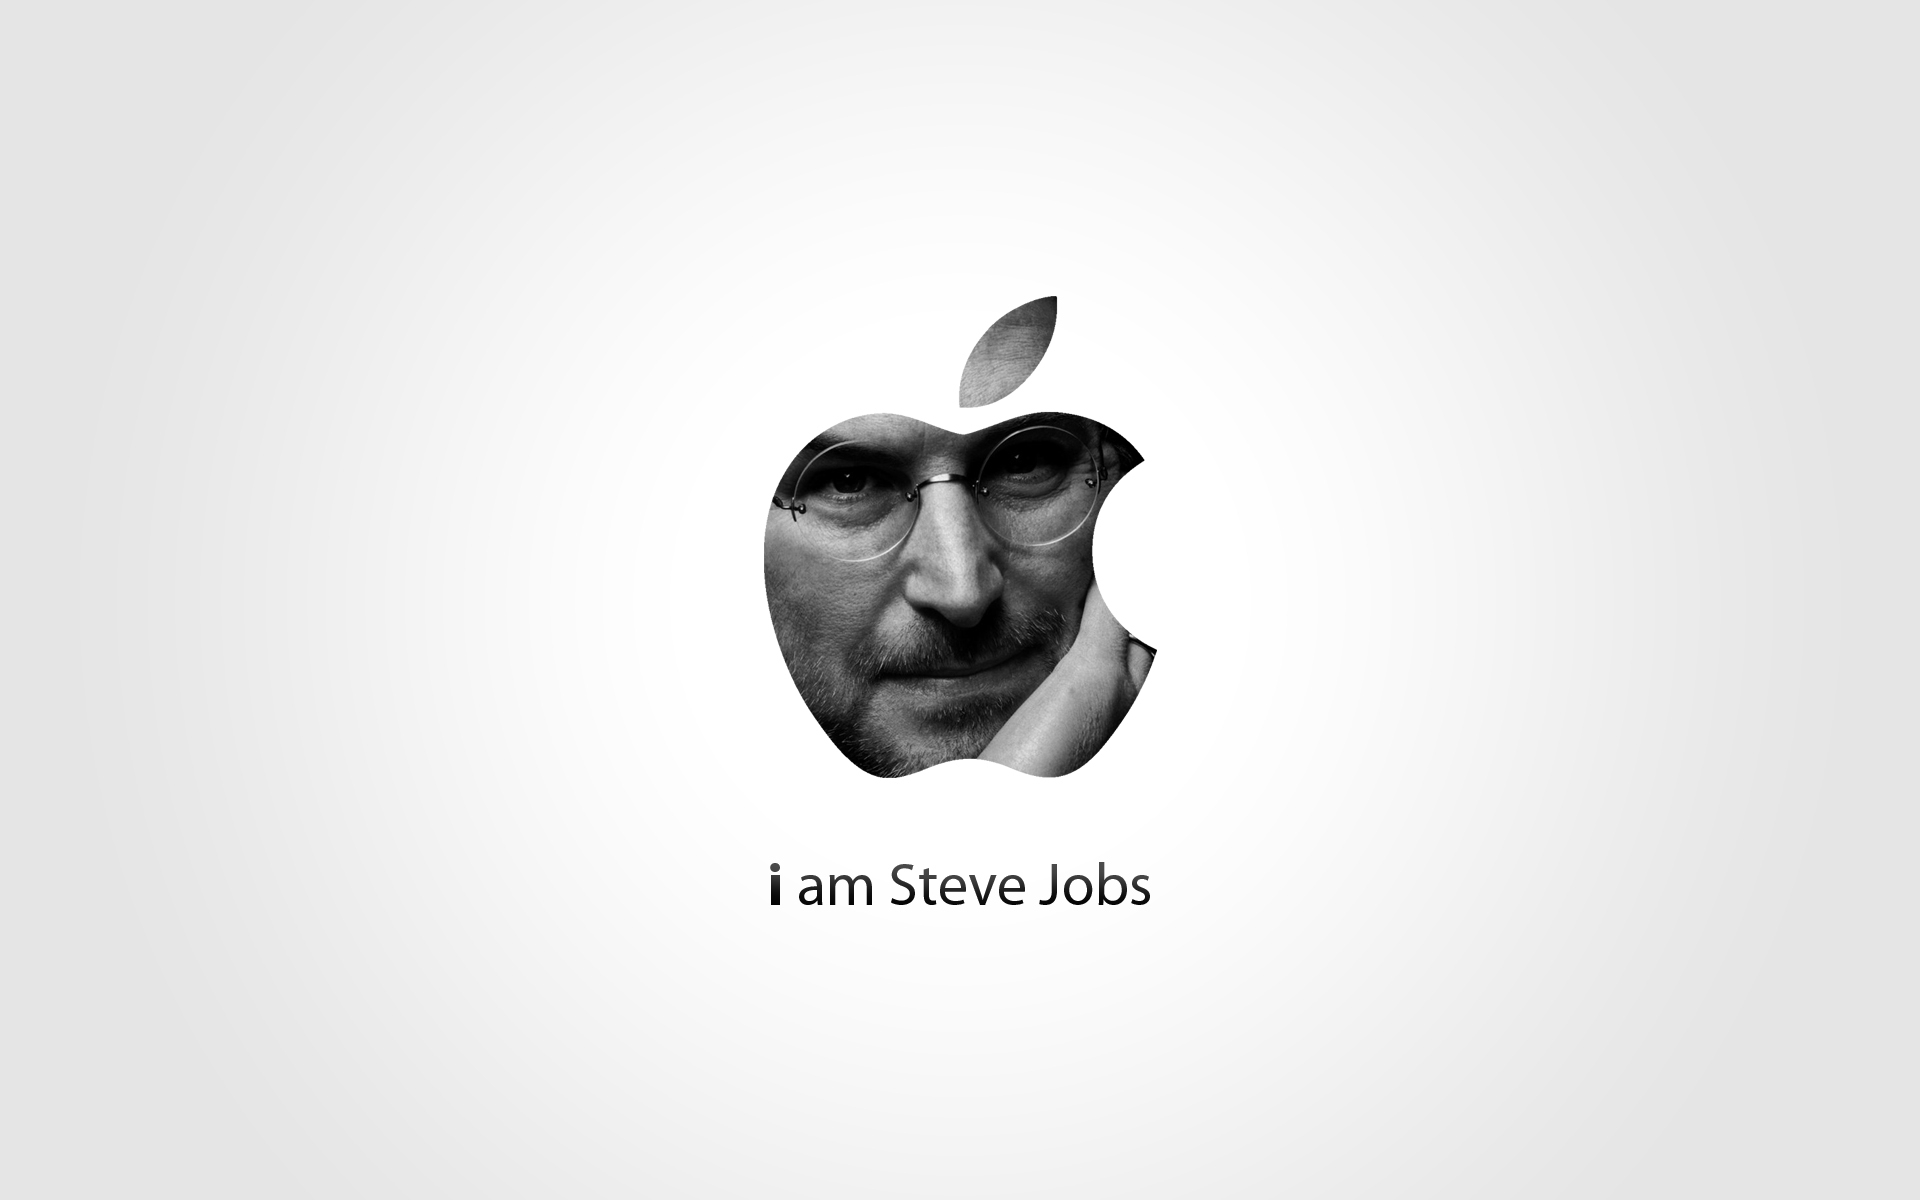 Steve Jobs Wallpapers, Pictures, Photos & Images